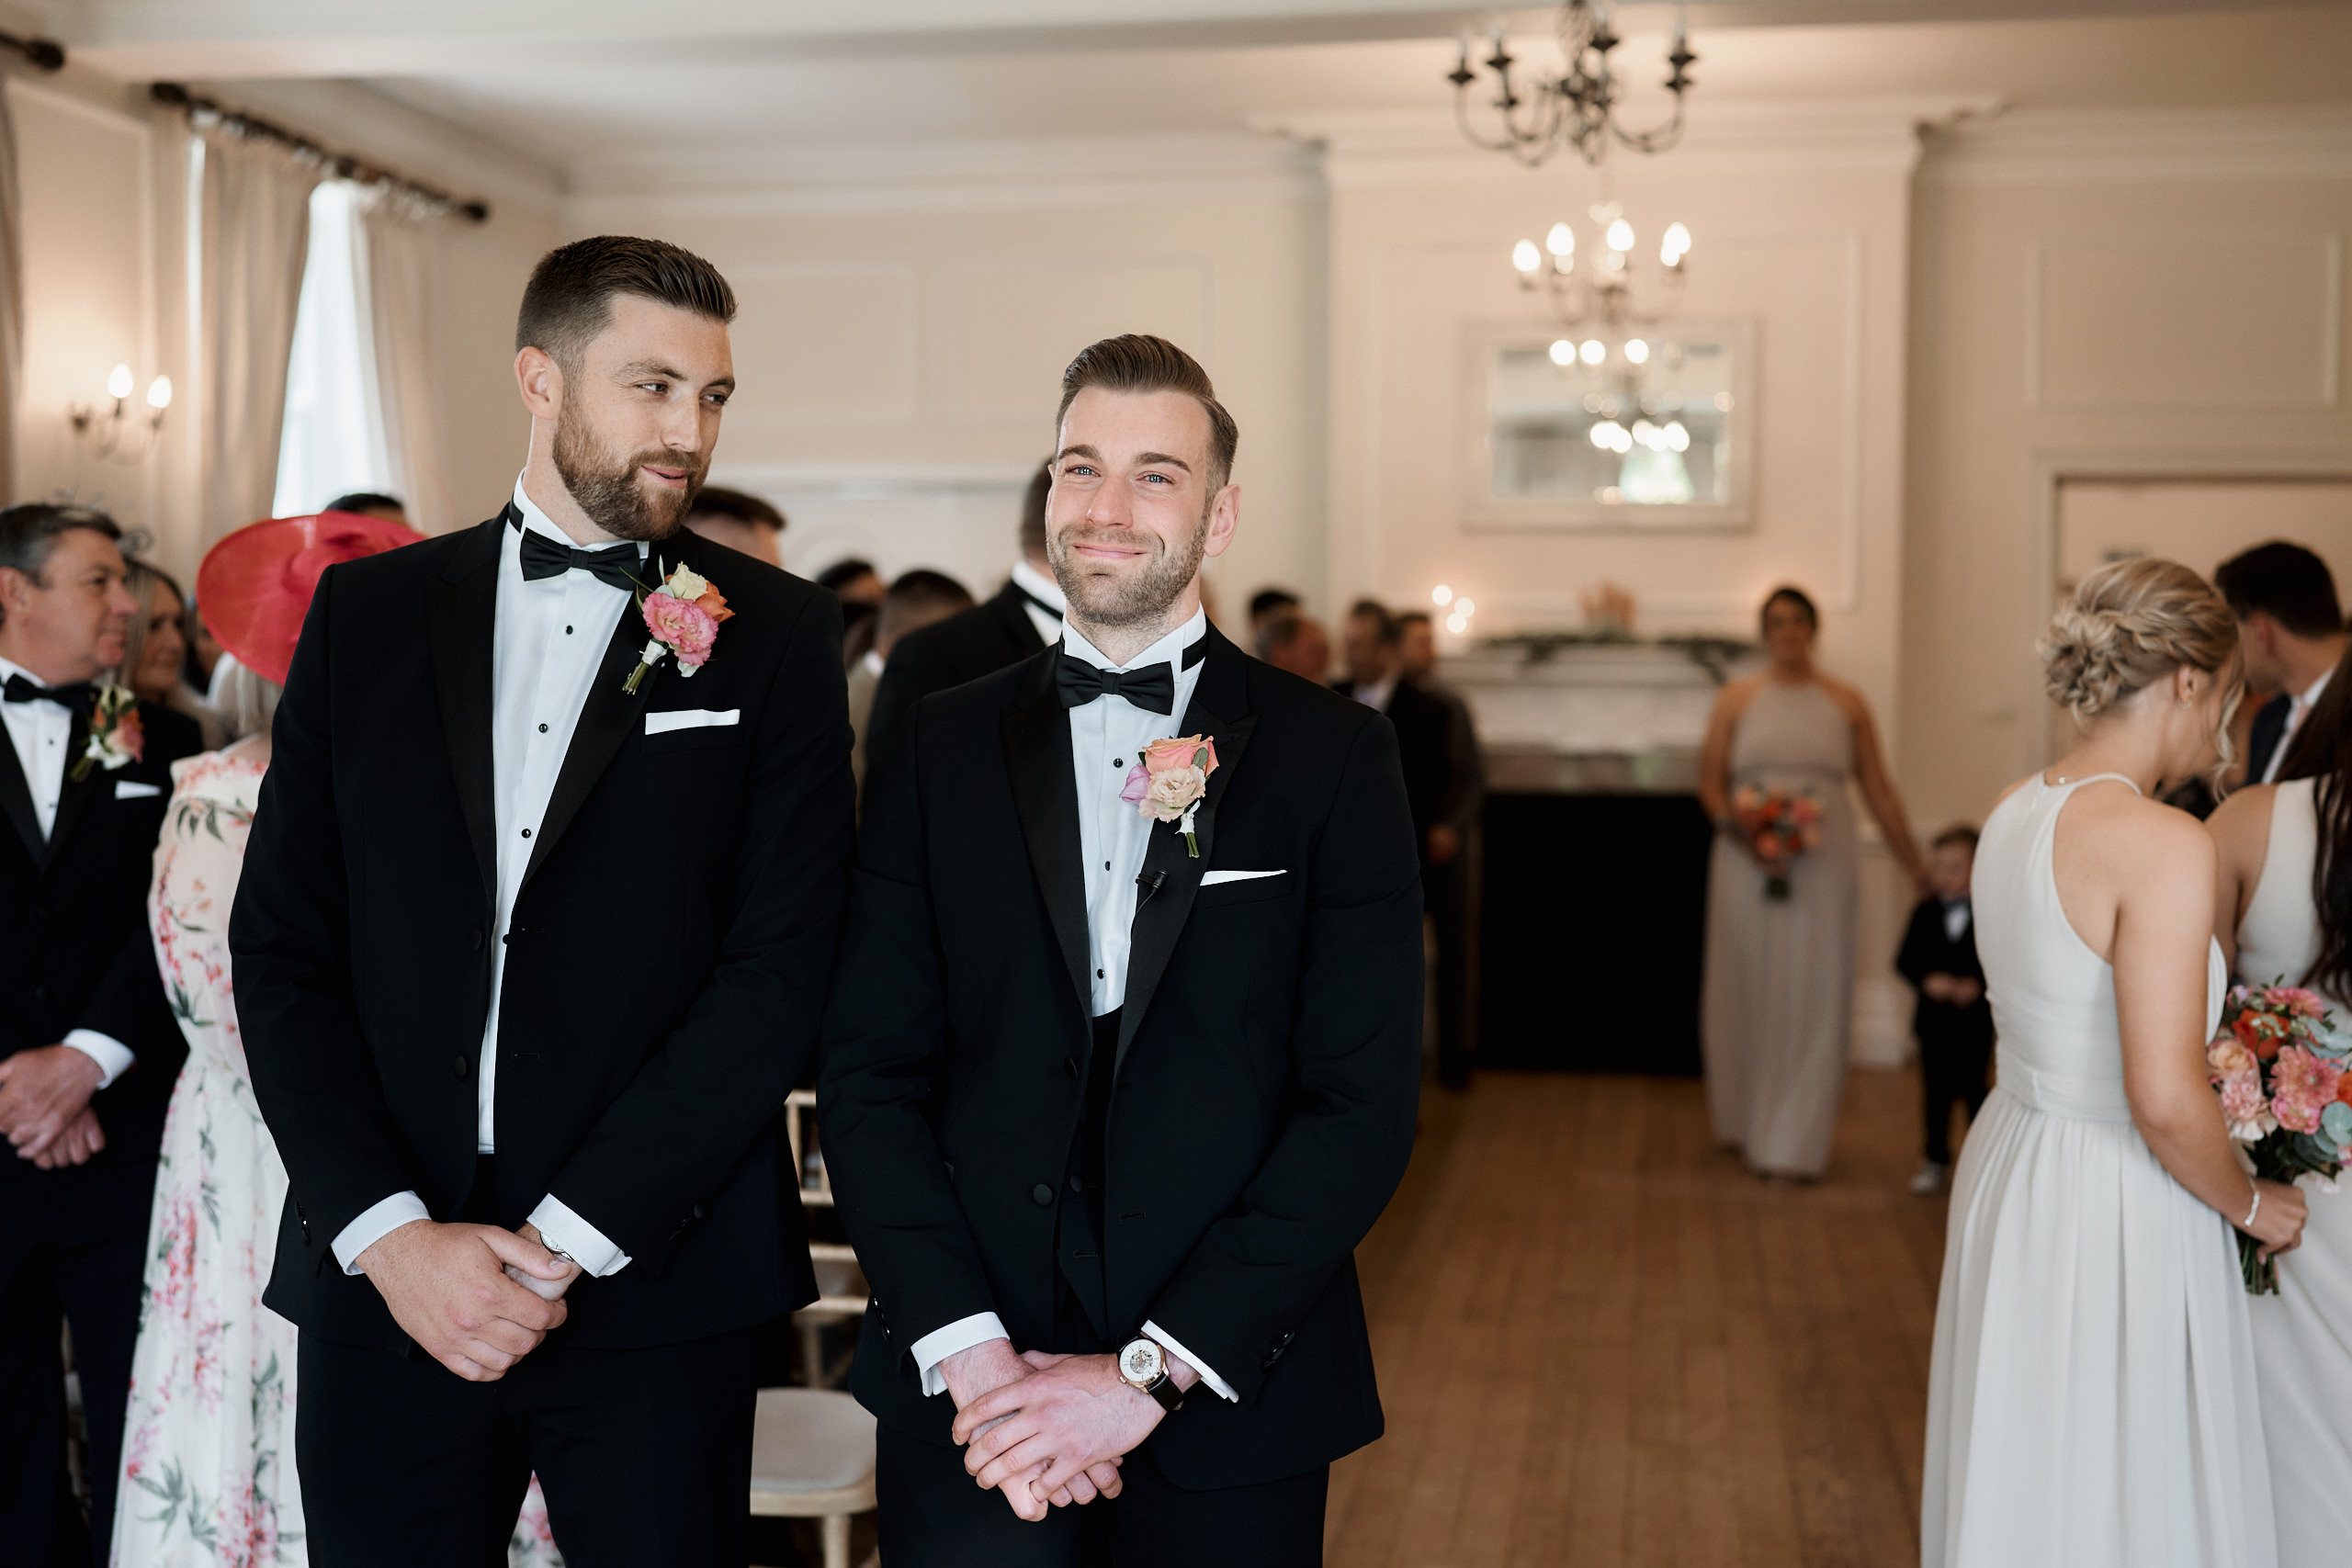 Two grooms in tuxedos walking down the aisle.